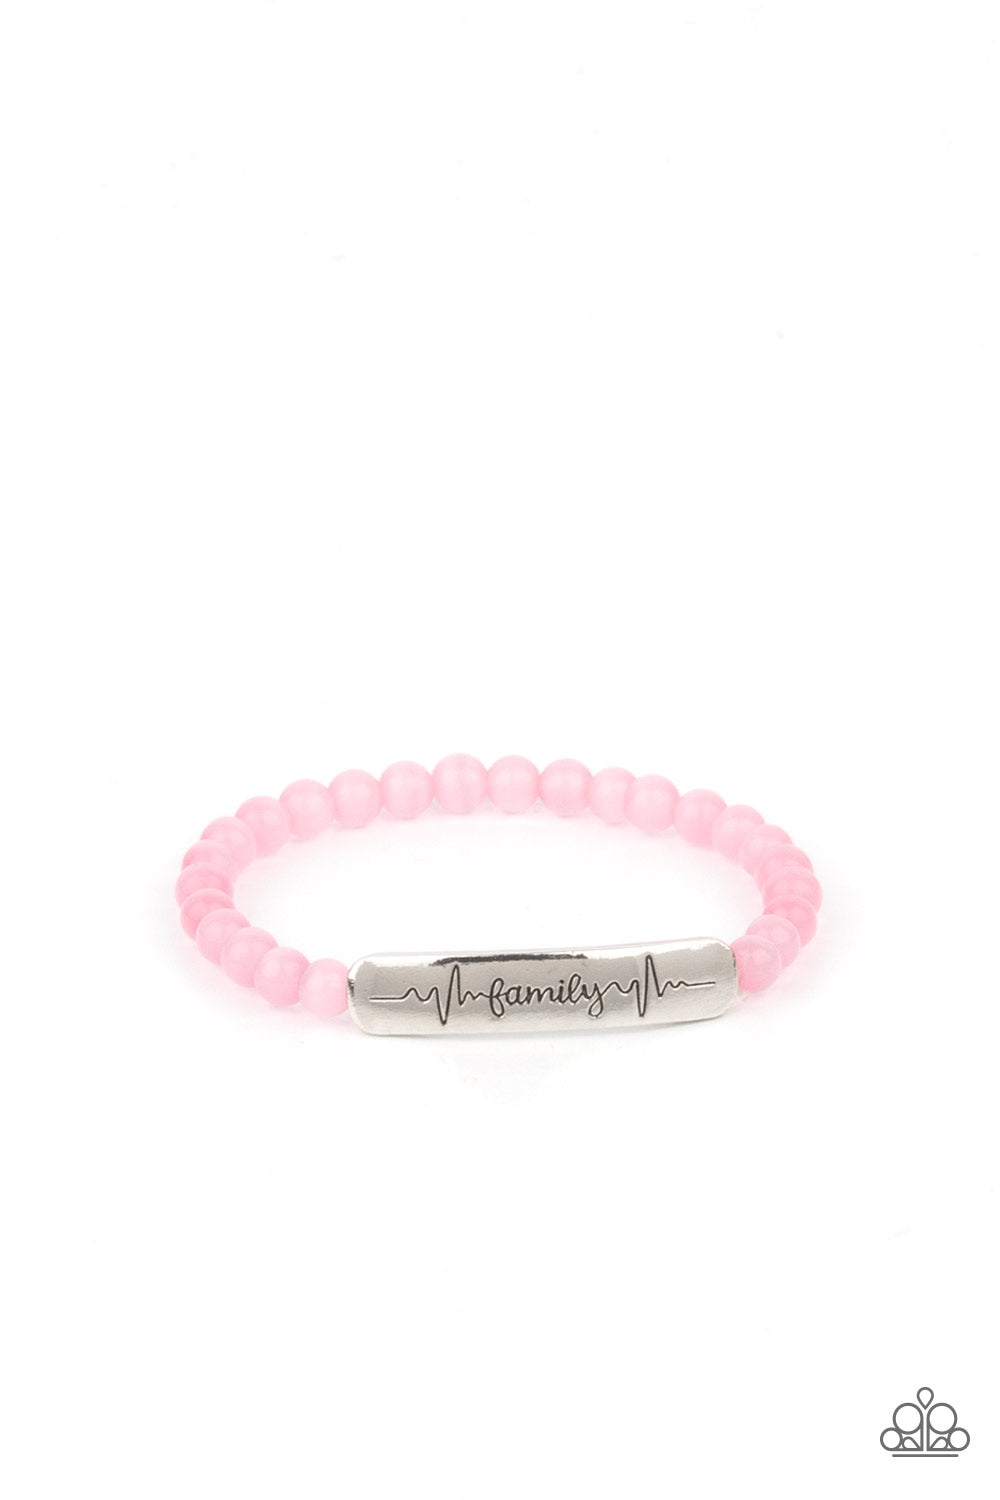 Paparazzi Family is Forever - Pink Bracelet - A Finishing Touch Jewelry